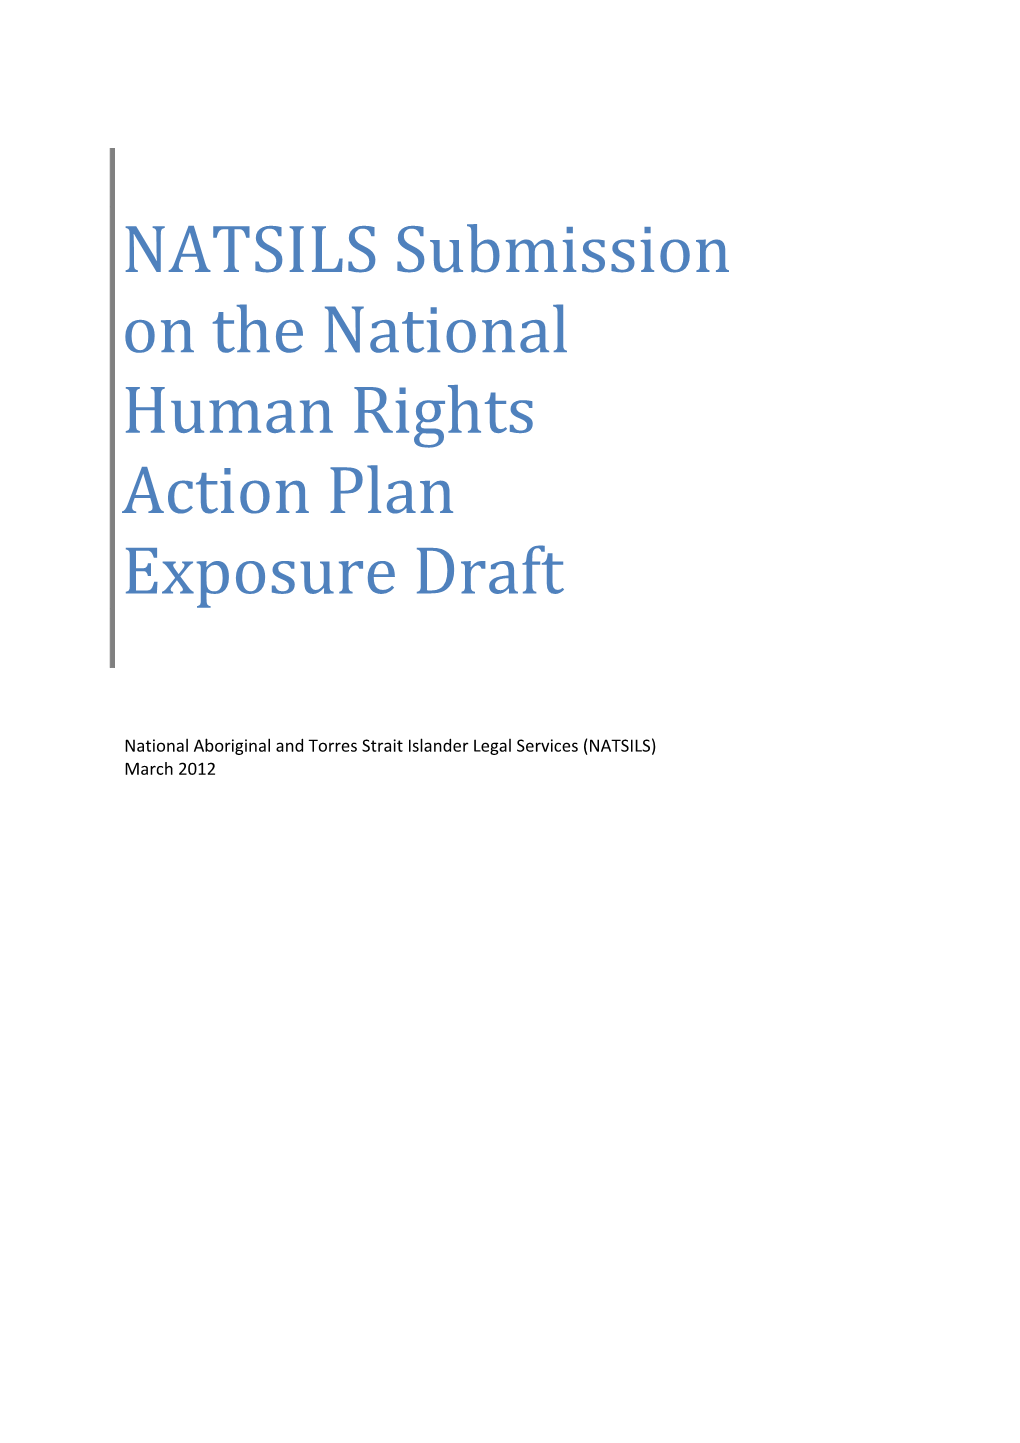 NATSILS Submission on the National Human Rights Action Plan Exposure Draft